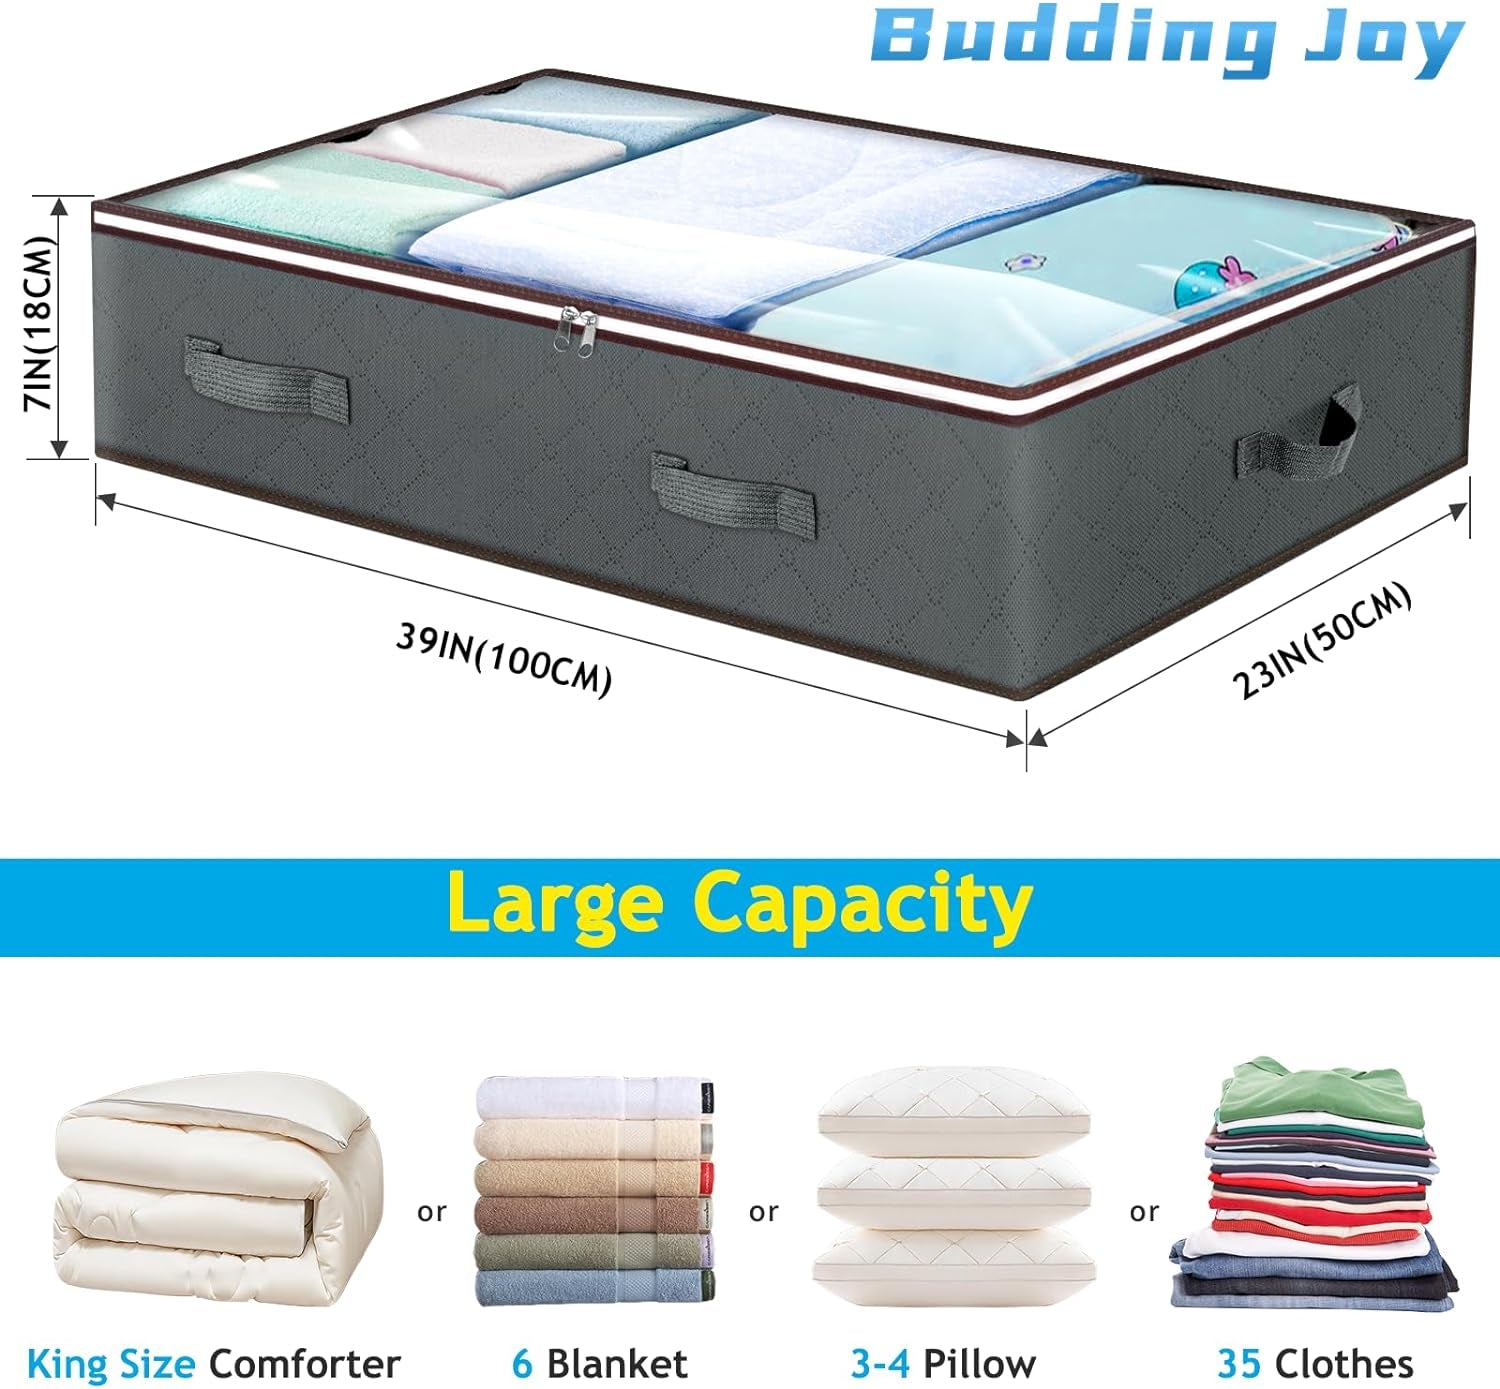  Foldable Underbed Storage Bags for Blankets, Towels etc.